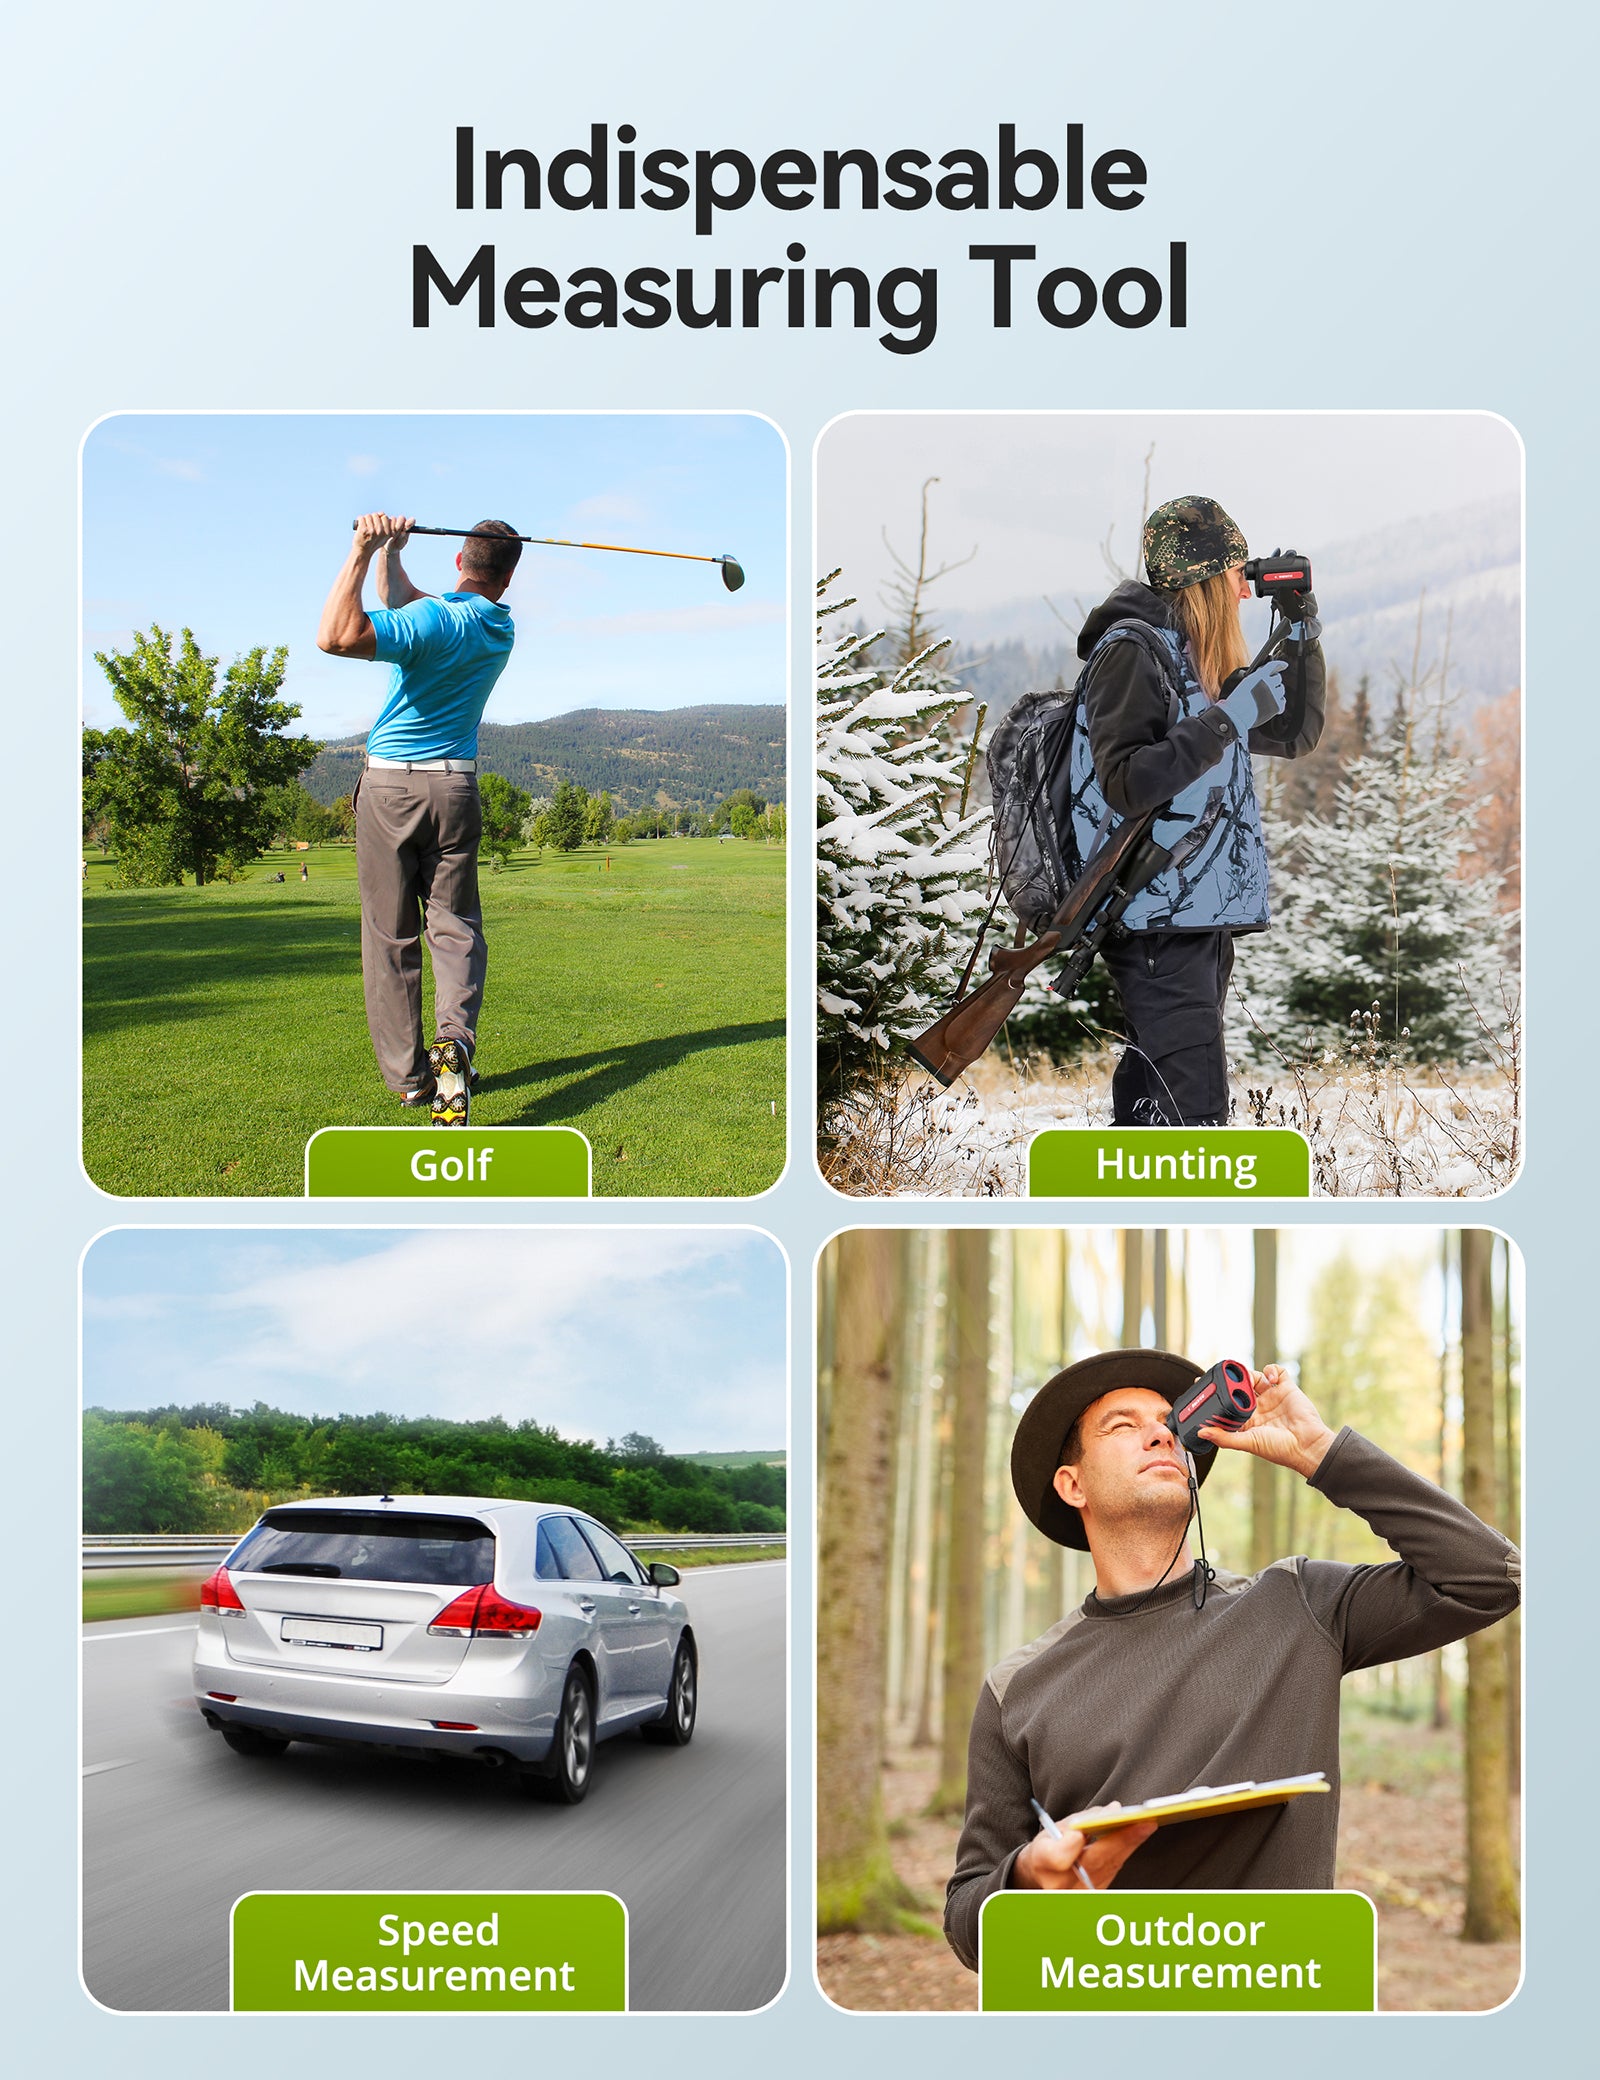 Indispensable Measuring Tool